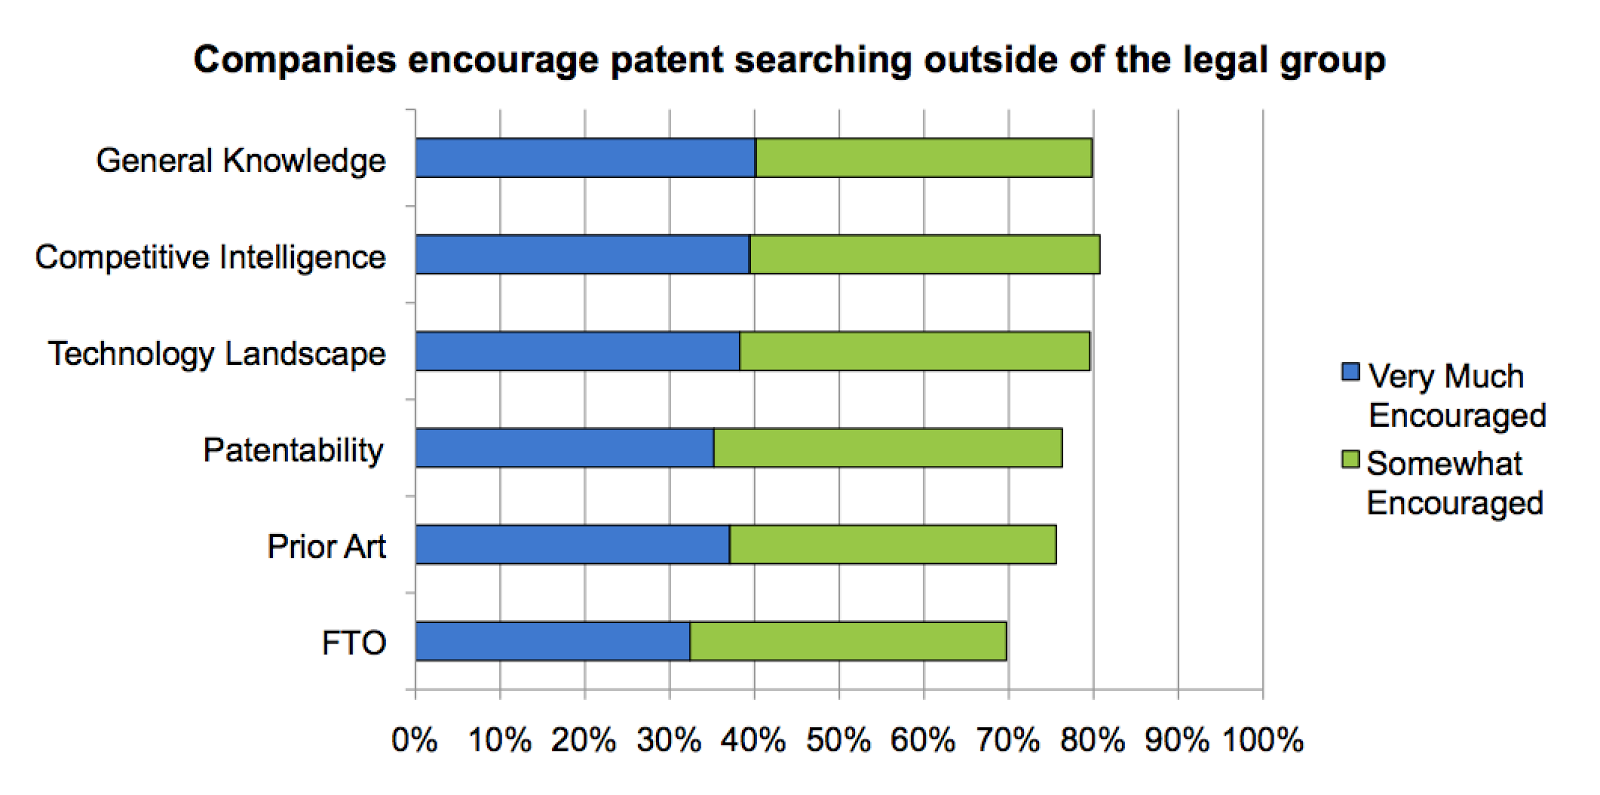 Patent searching outside of legal group